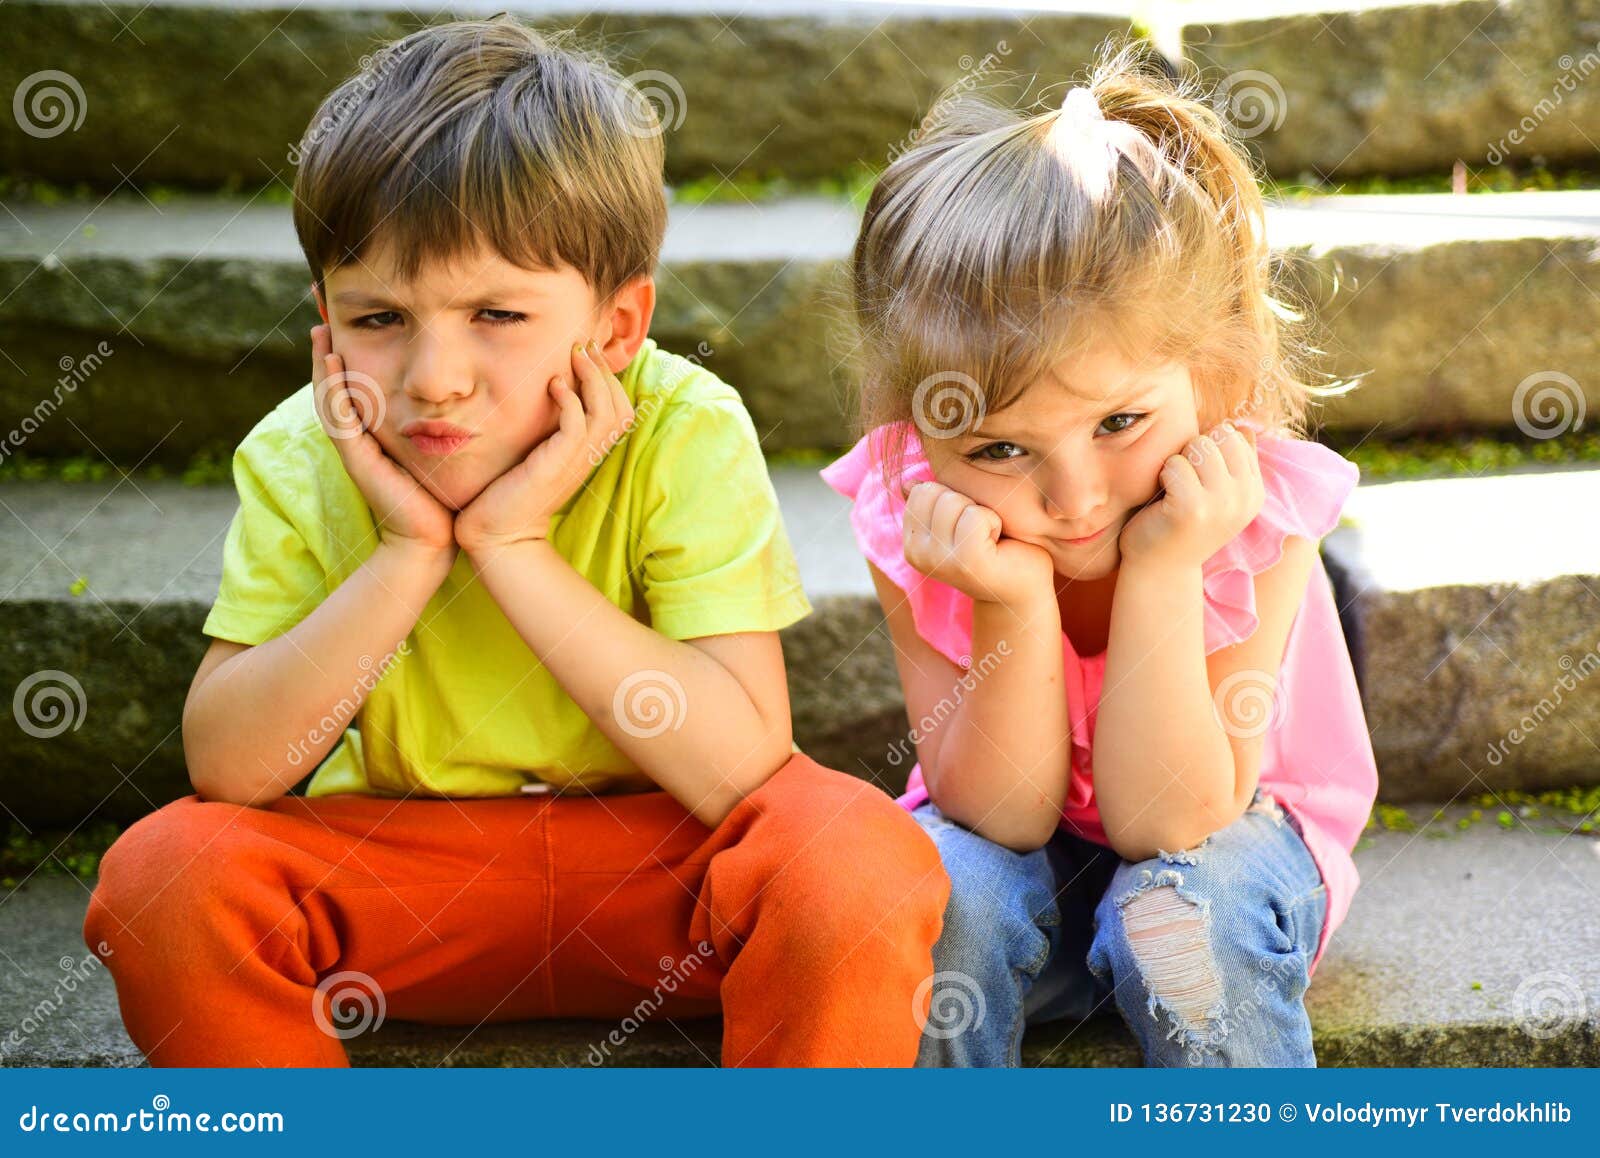 1 147 Little Boy Girl Best Friends Photos Free Royalty Free Stock Photos From Dreamstime